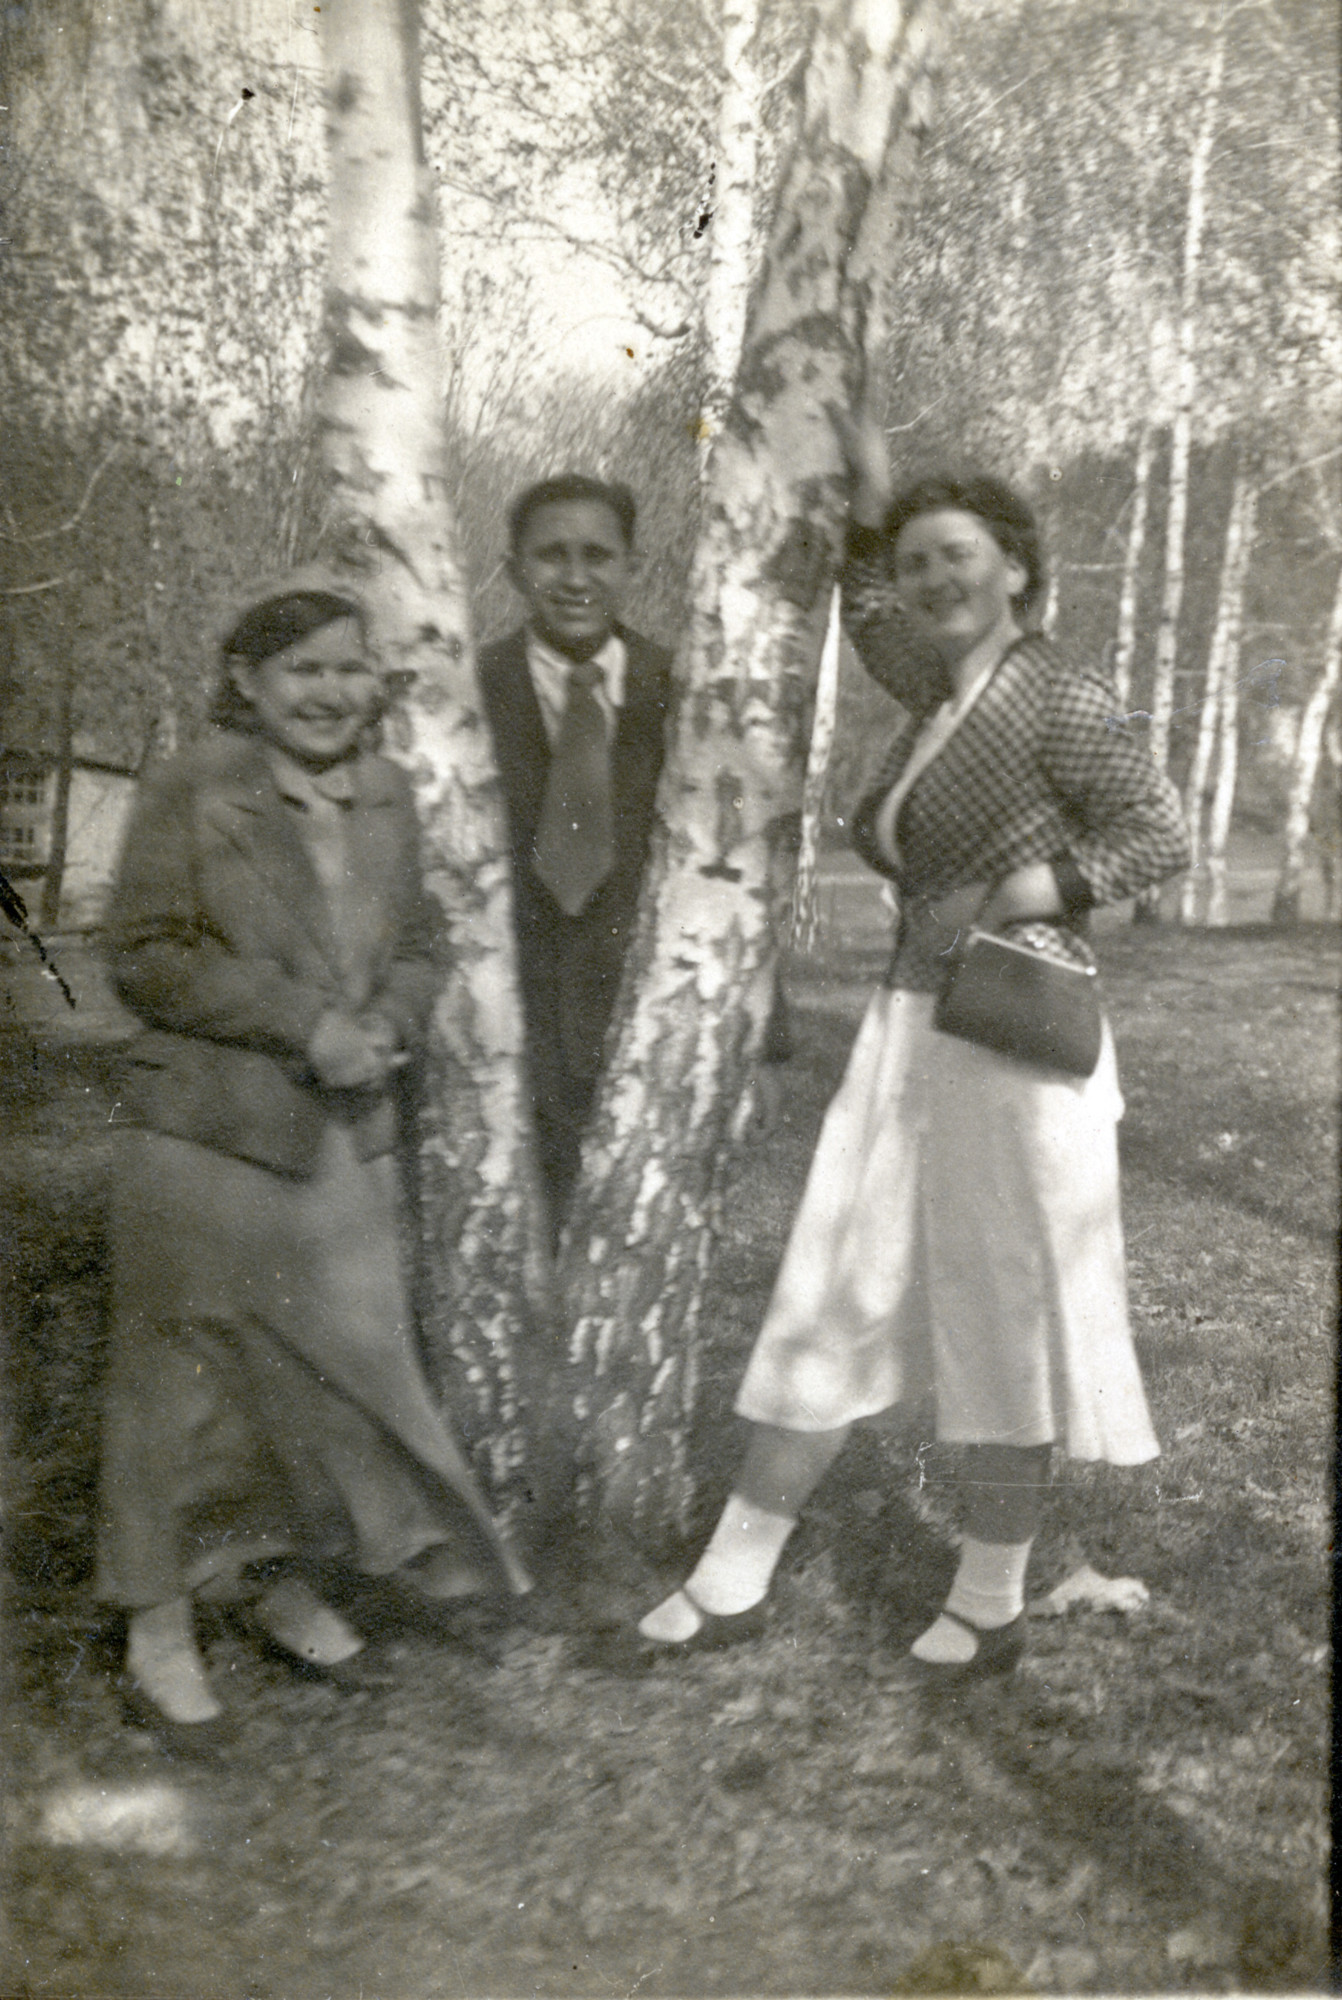 Jewish displaced persons in the Pocking displaced persons camp.

Pictured (left to right) are Stella Feidel, Shlomo Garber, and [unidentified].